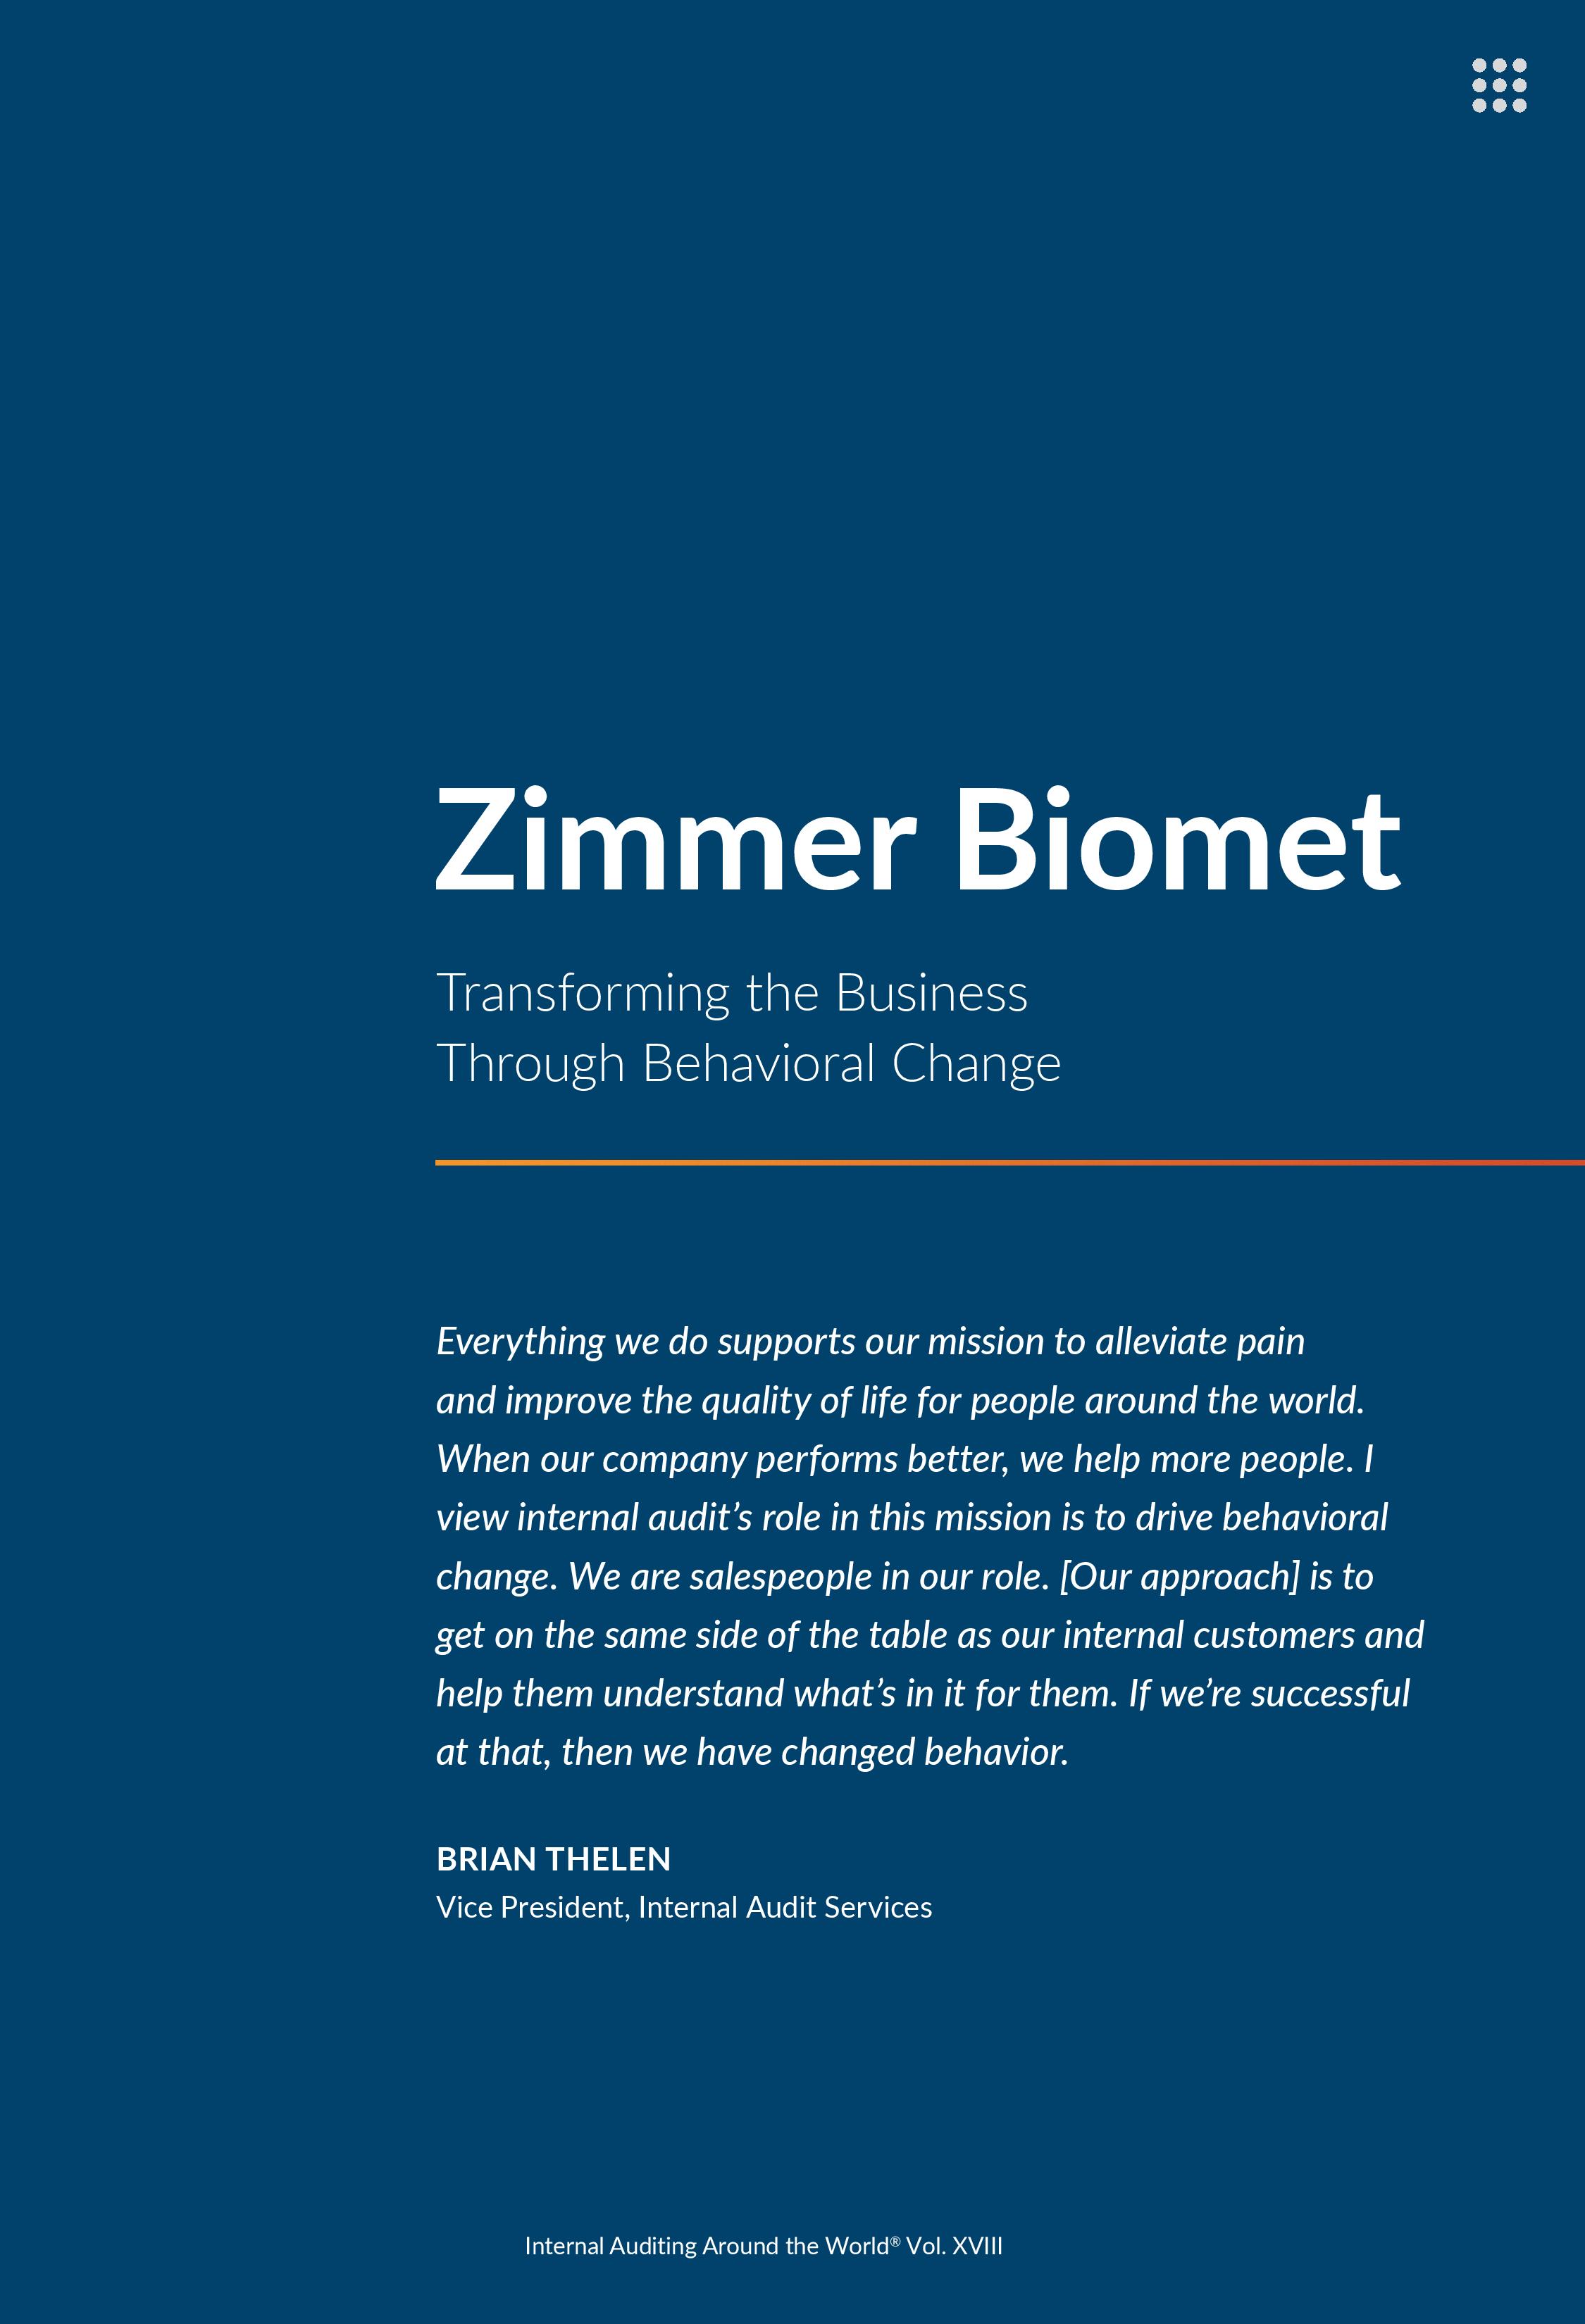 Screenshot of the first page of Zimmer Biomet